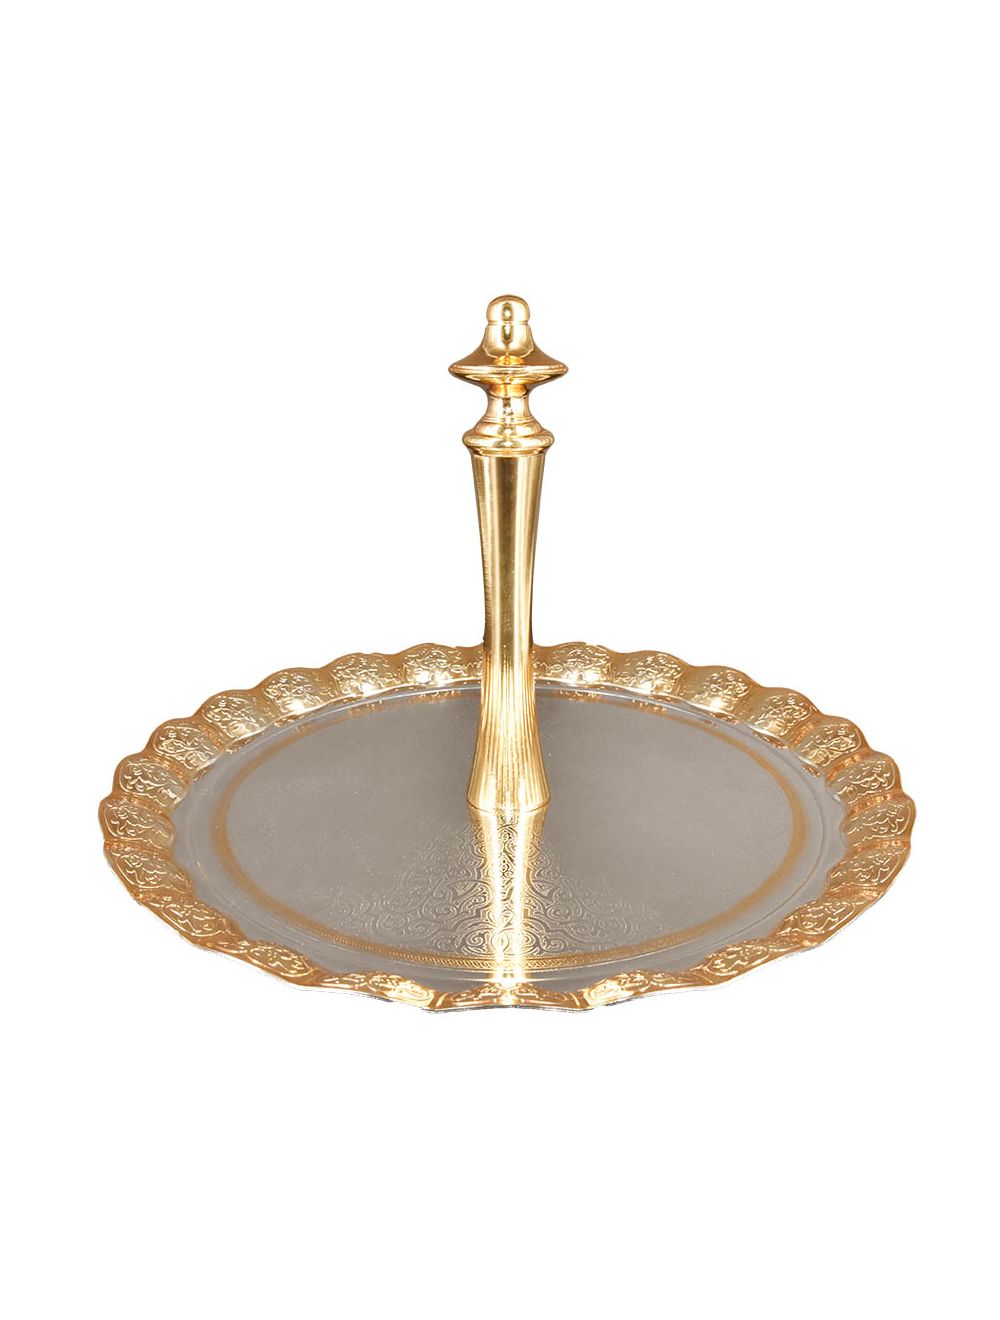 Serving Tray With Holder Acrylic Silver-Gold Design